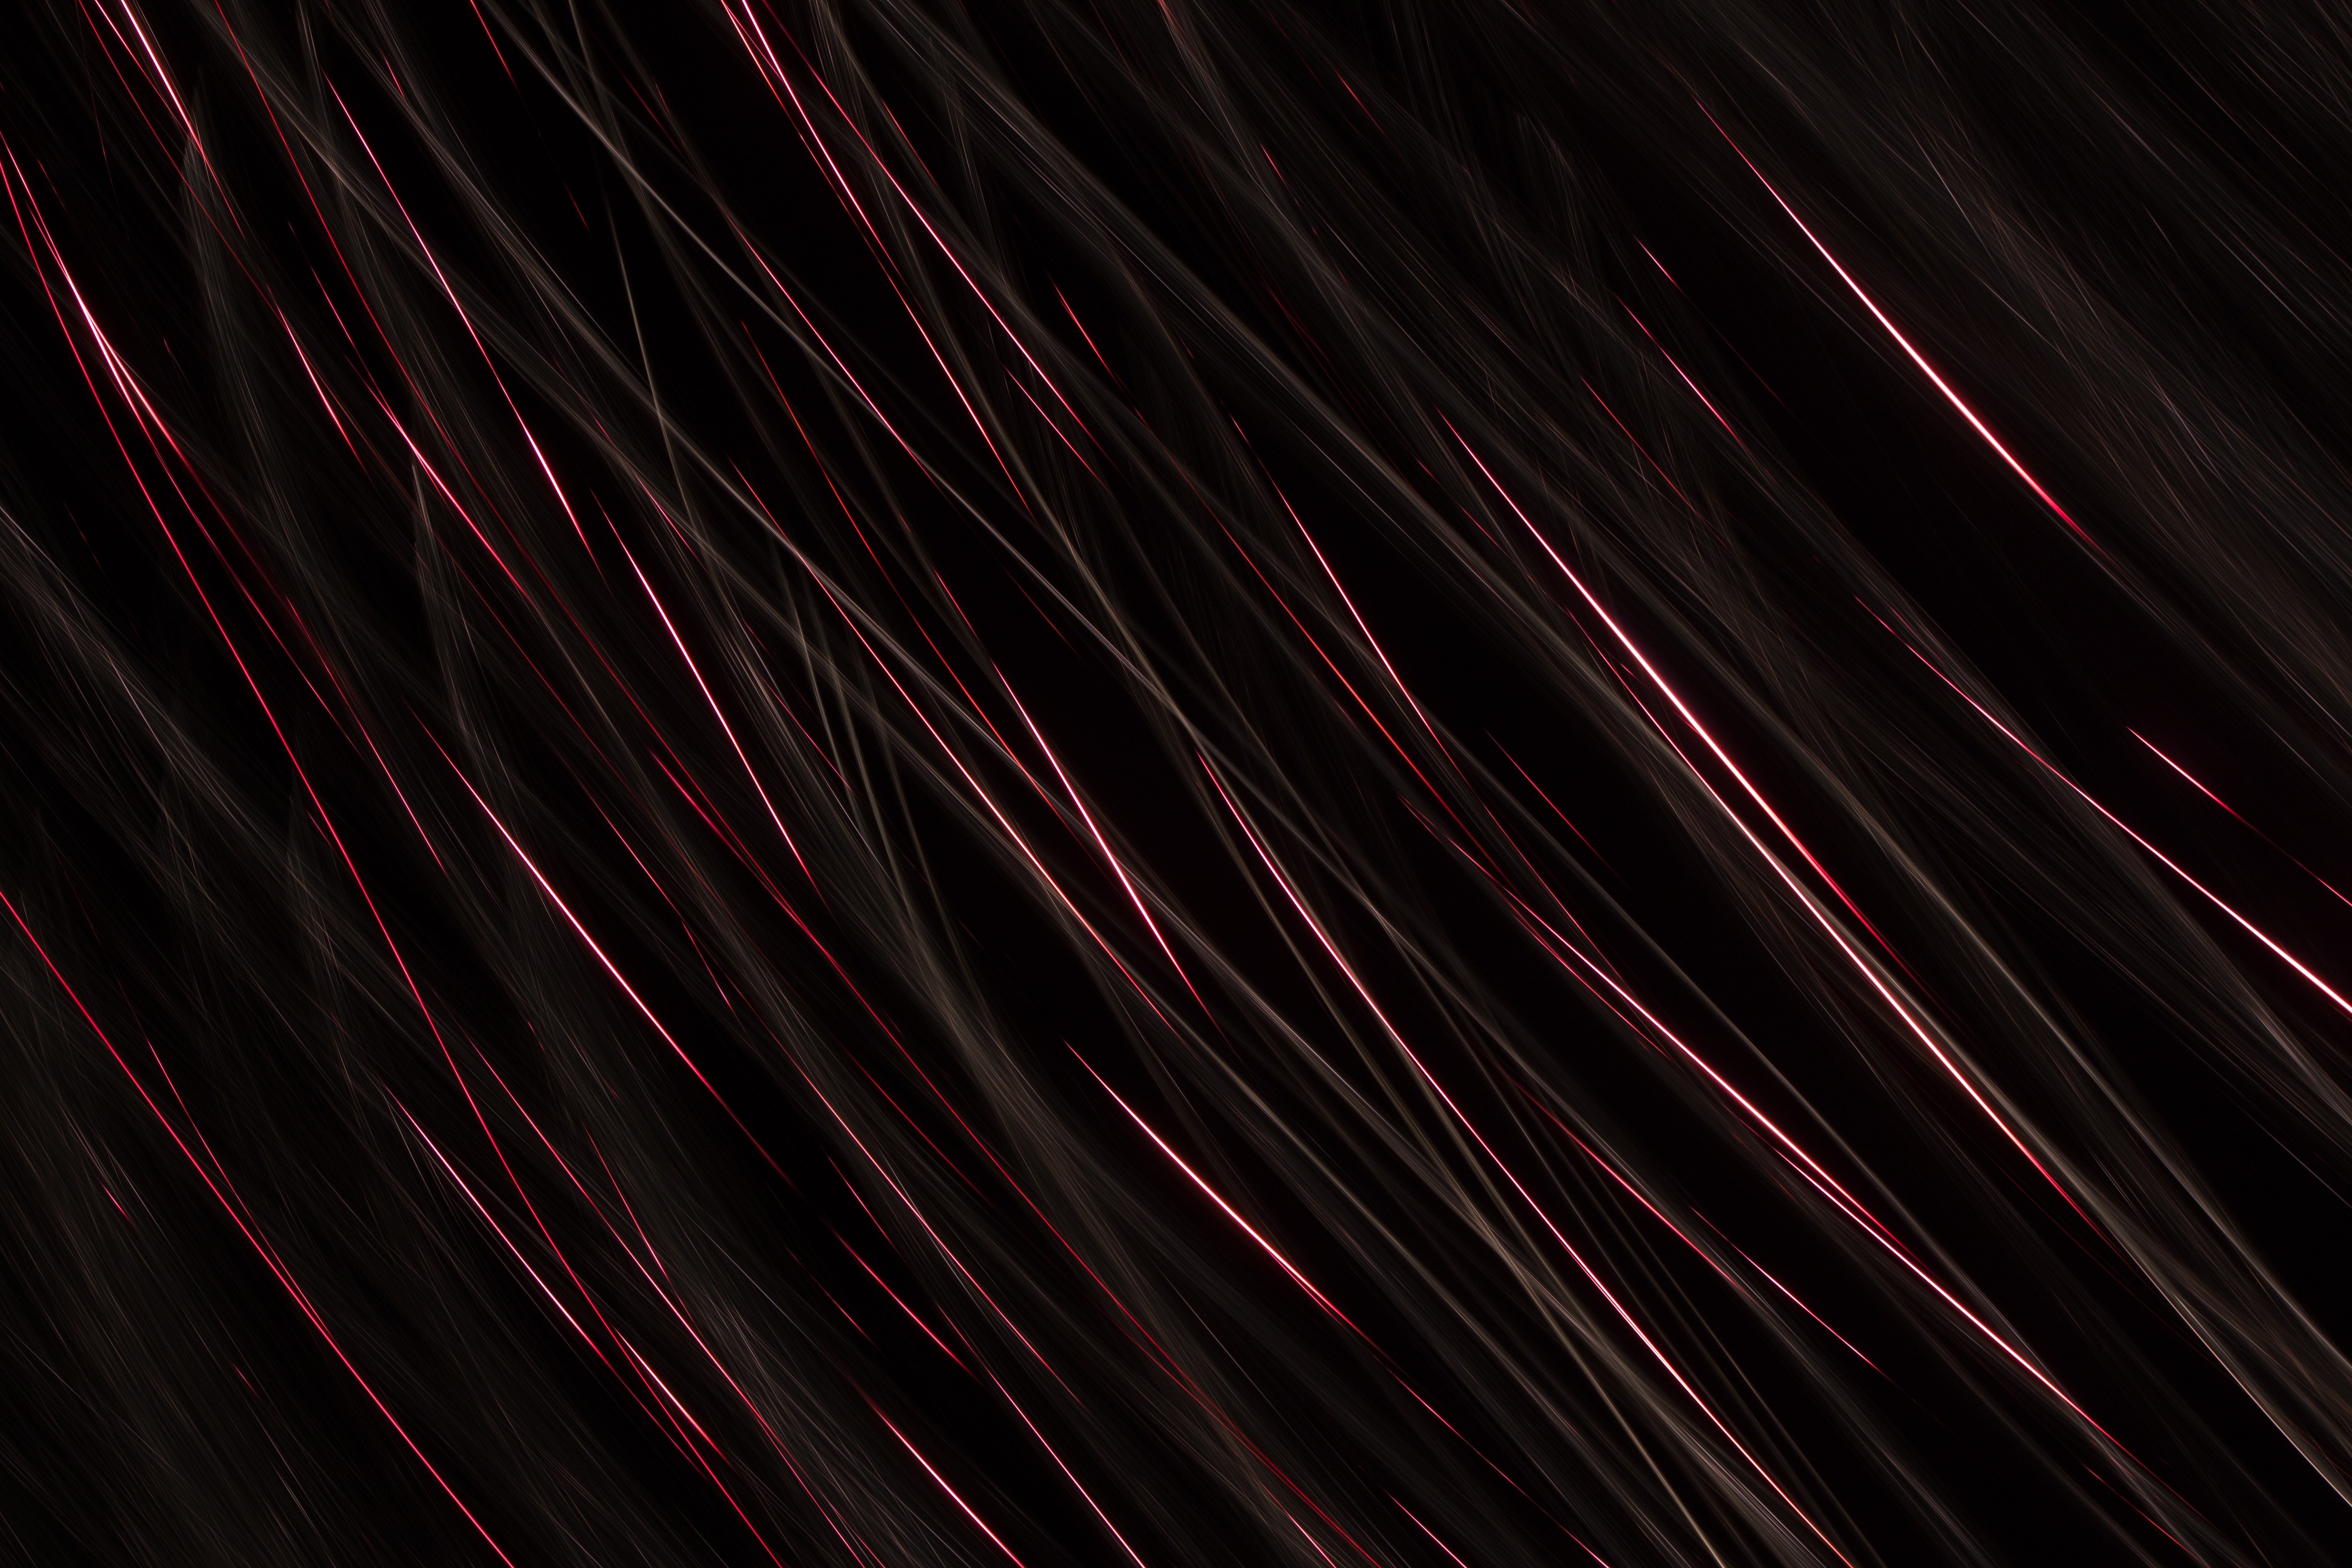 glow, obliquely, abstract, black, red, dark, lines